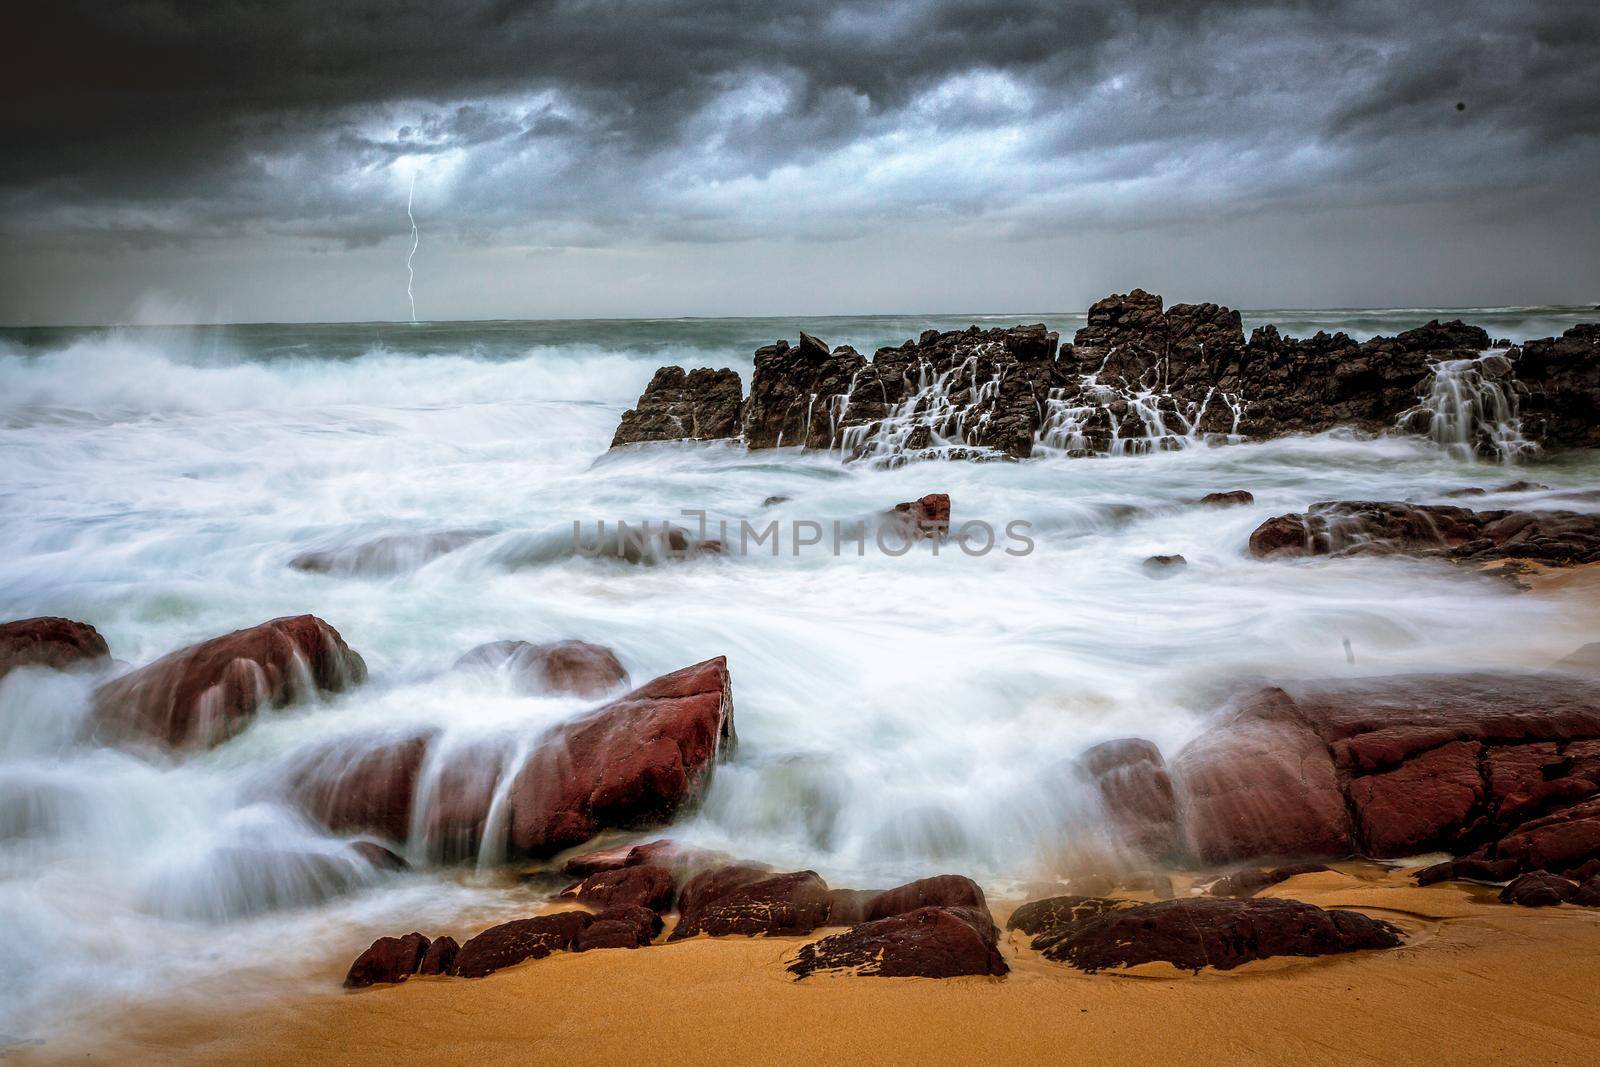 Storm over beach and turbulent waves crashing on shore by lovleah